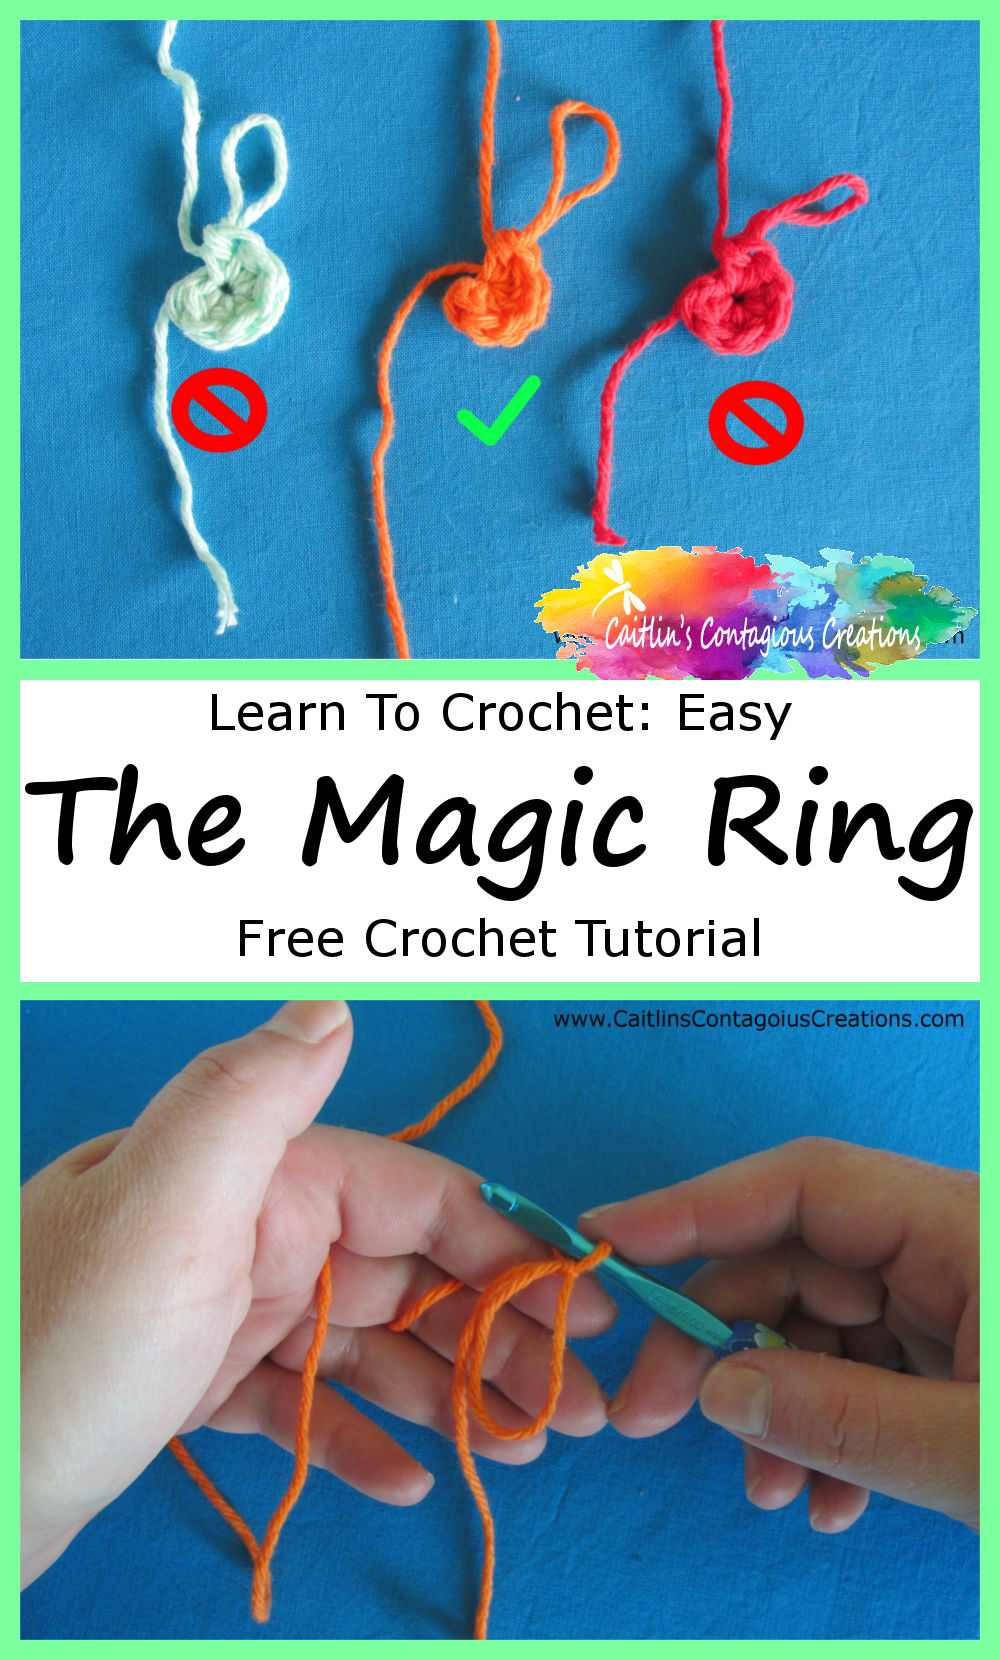 photo of magic ring and no magic ring starts and after step 6 with text overlay